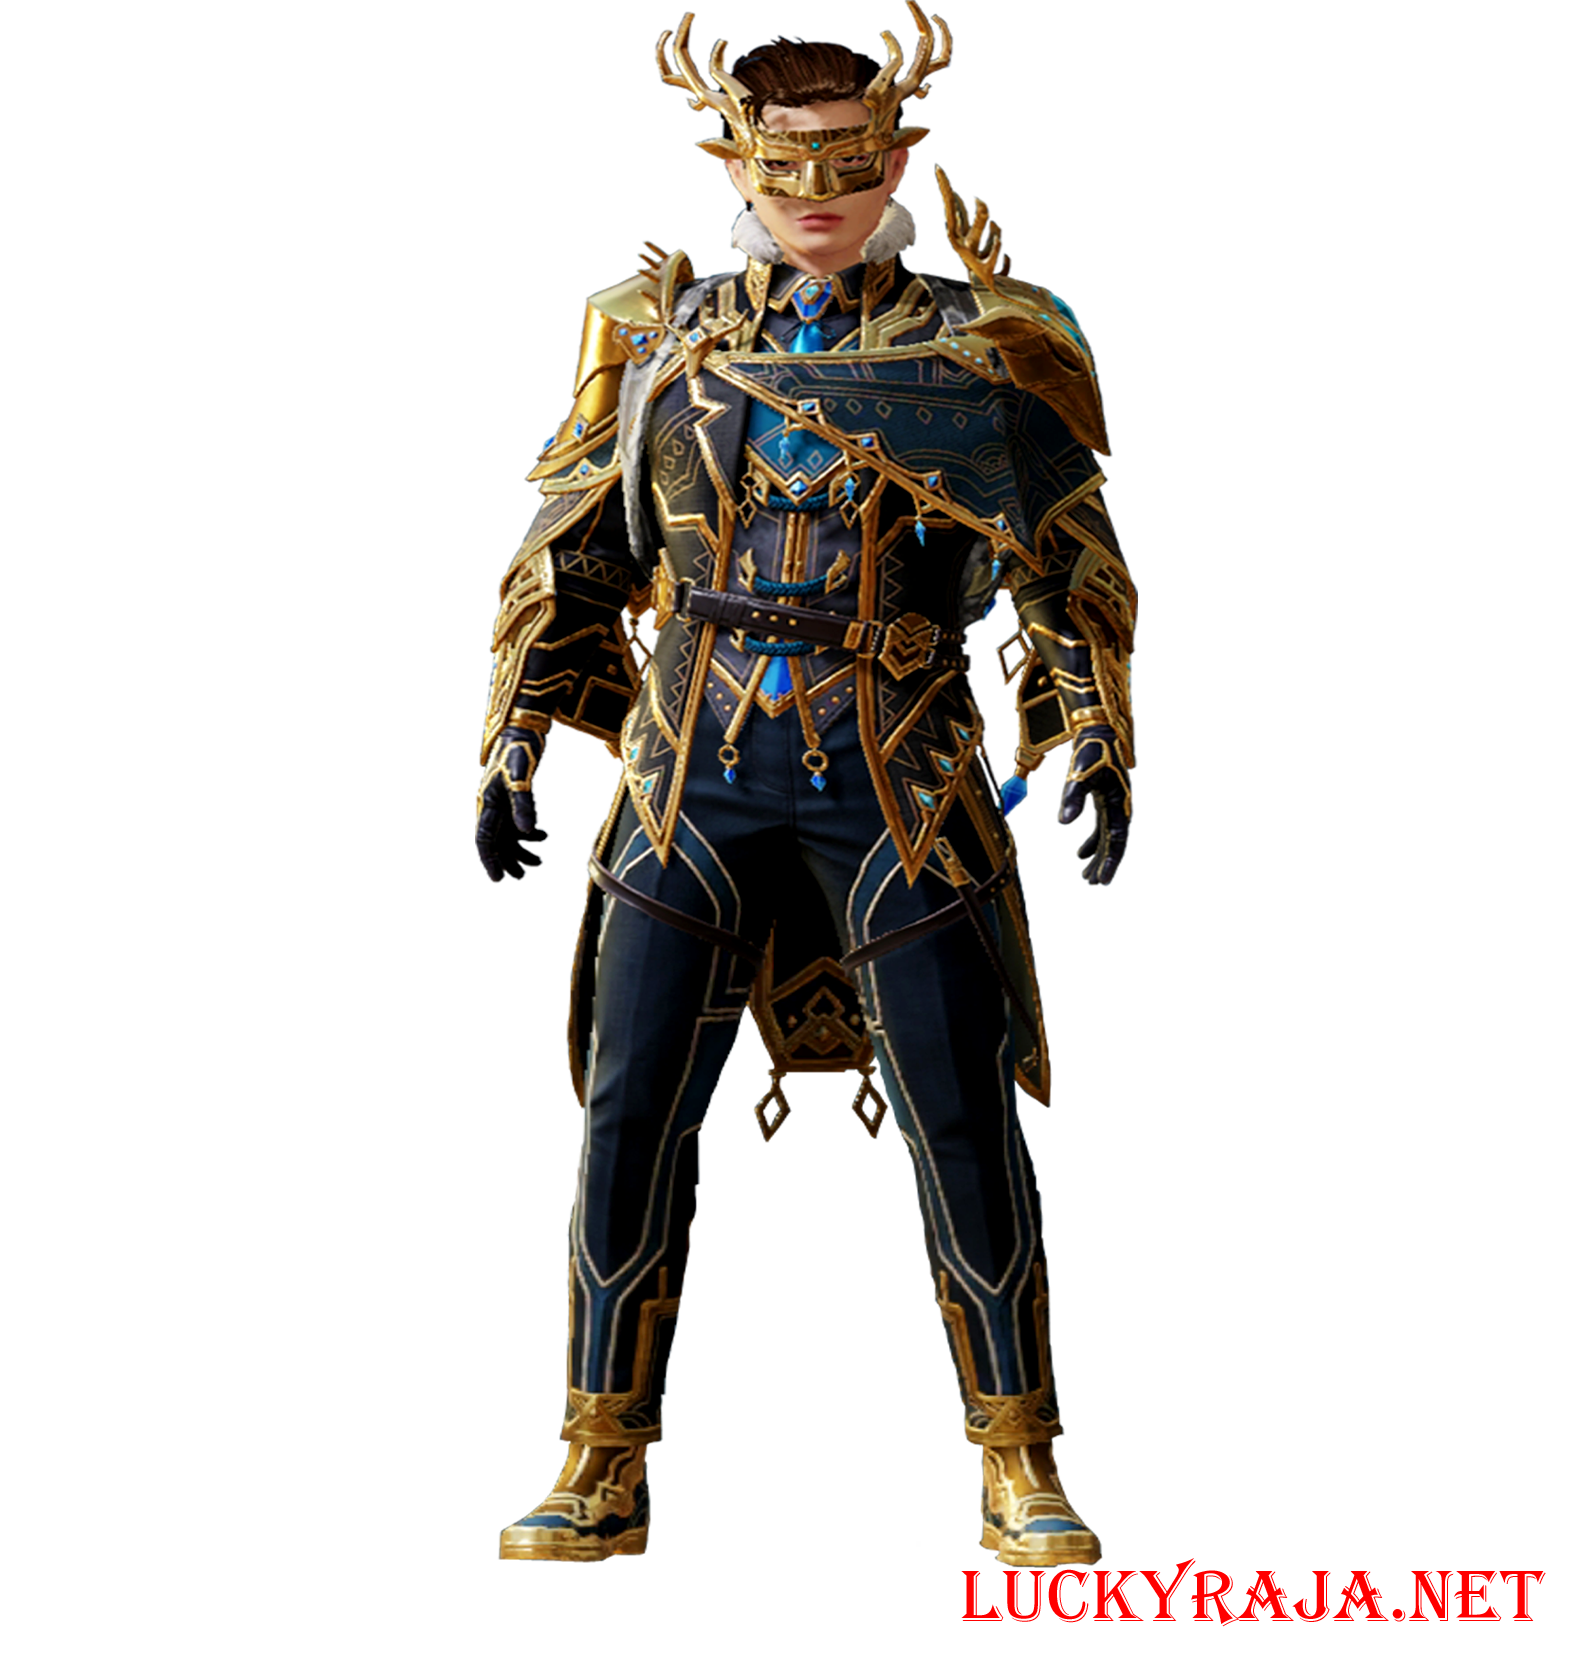 Aurulent Antlers ,Aurulent Antlers images,Aurulent Antlers pubg mobile,Aurulent Antlers outfit,pubg mobile outfits,animation,cartoon images